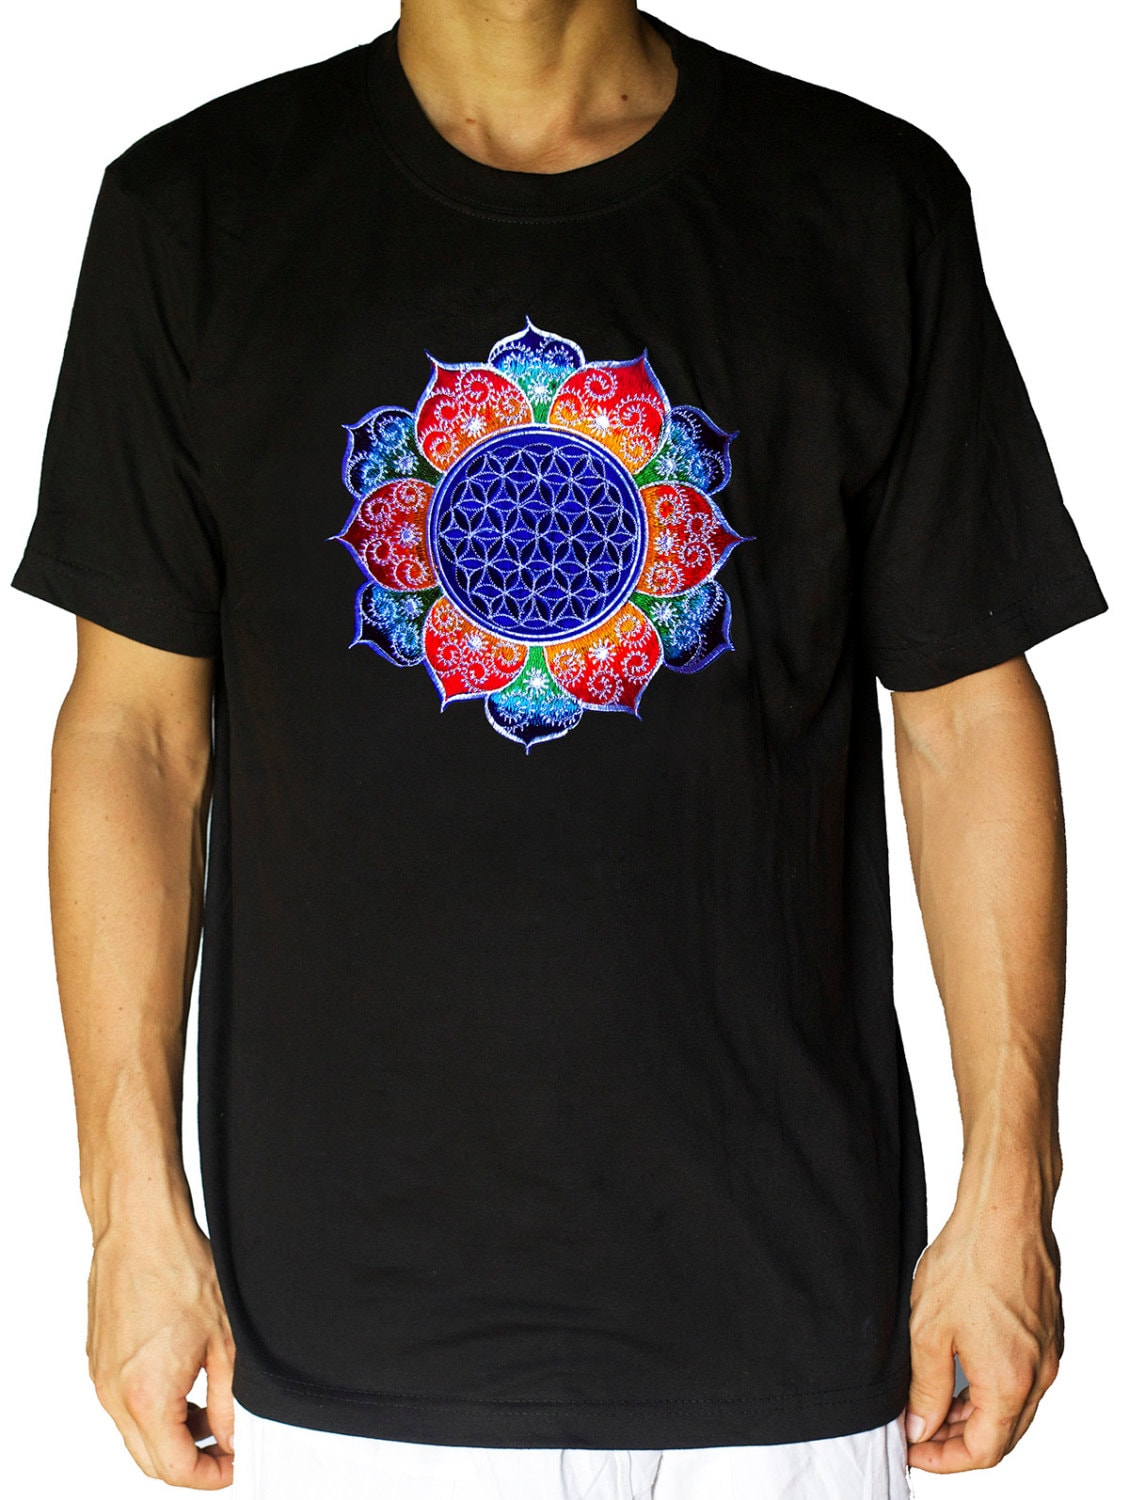 Flower of Life shirt rainbow fractal white - sacred geometry embroidery no print drunvalo melchizedek handmade - choose any colour and size